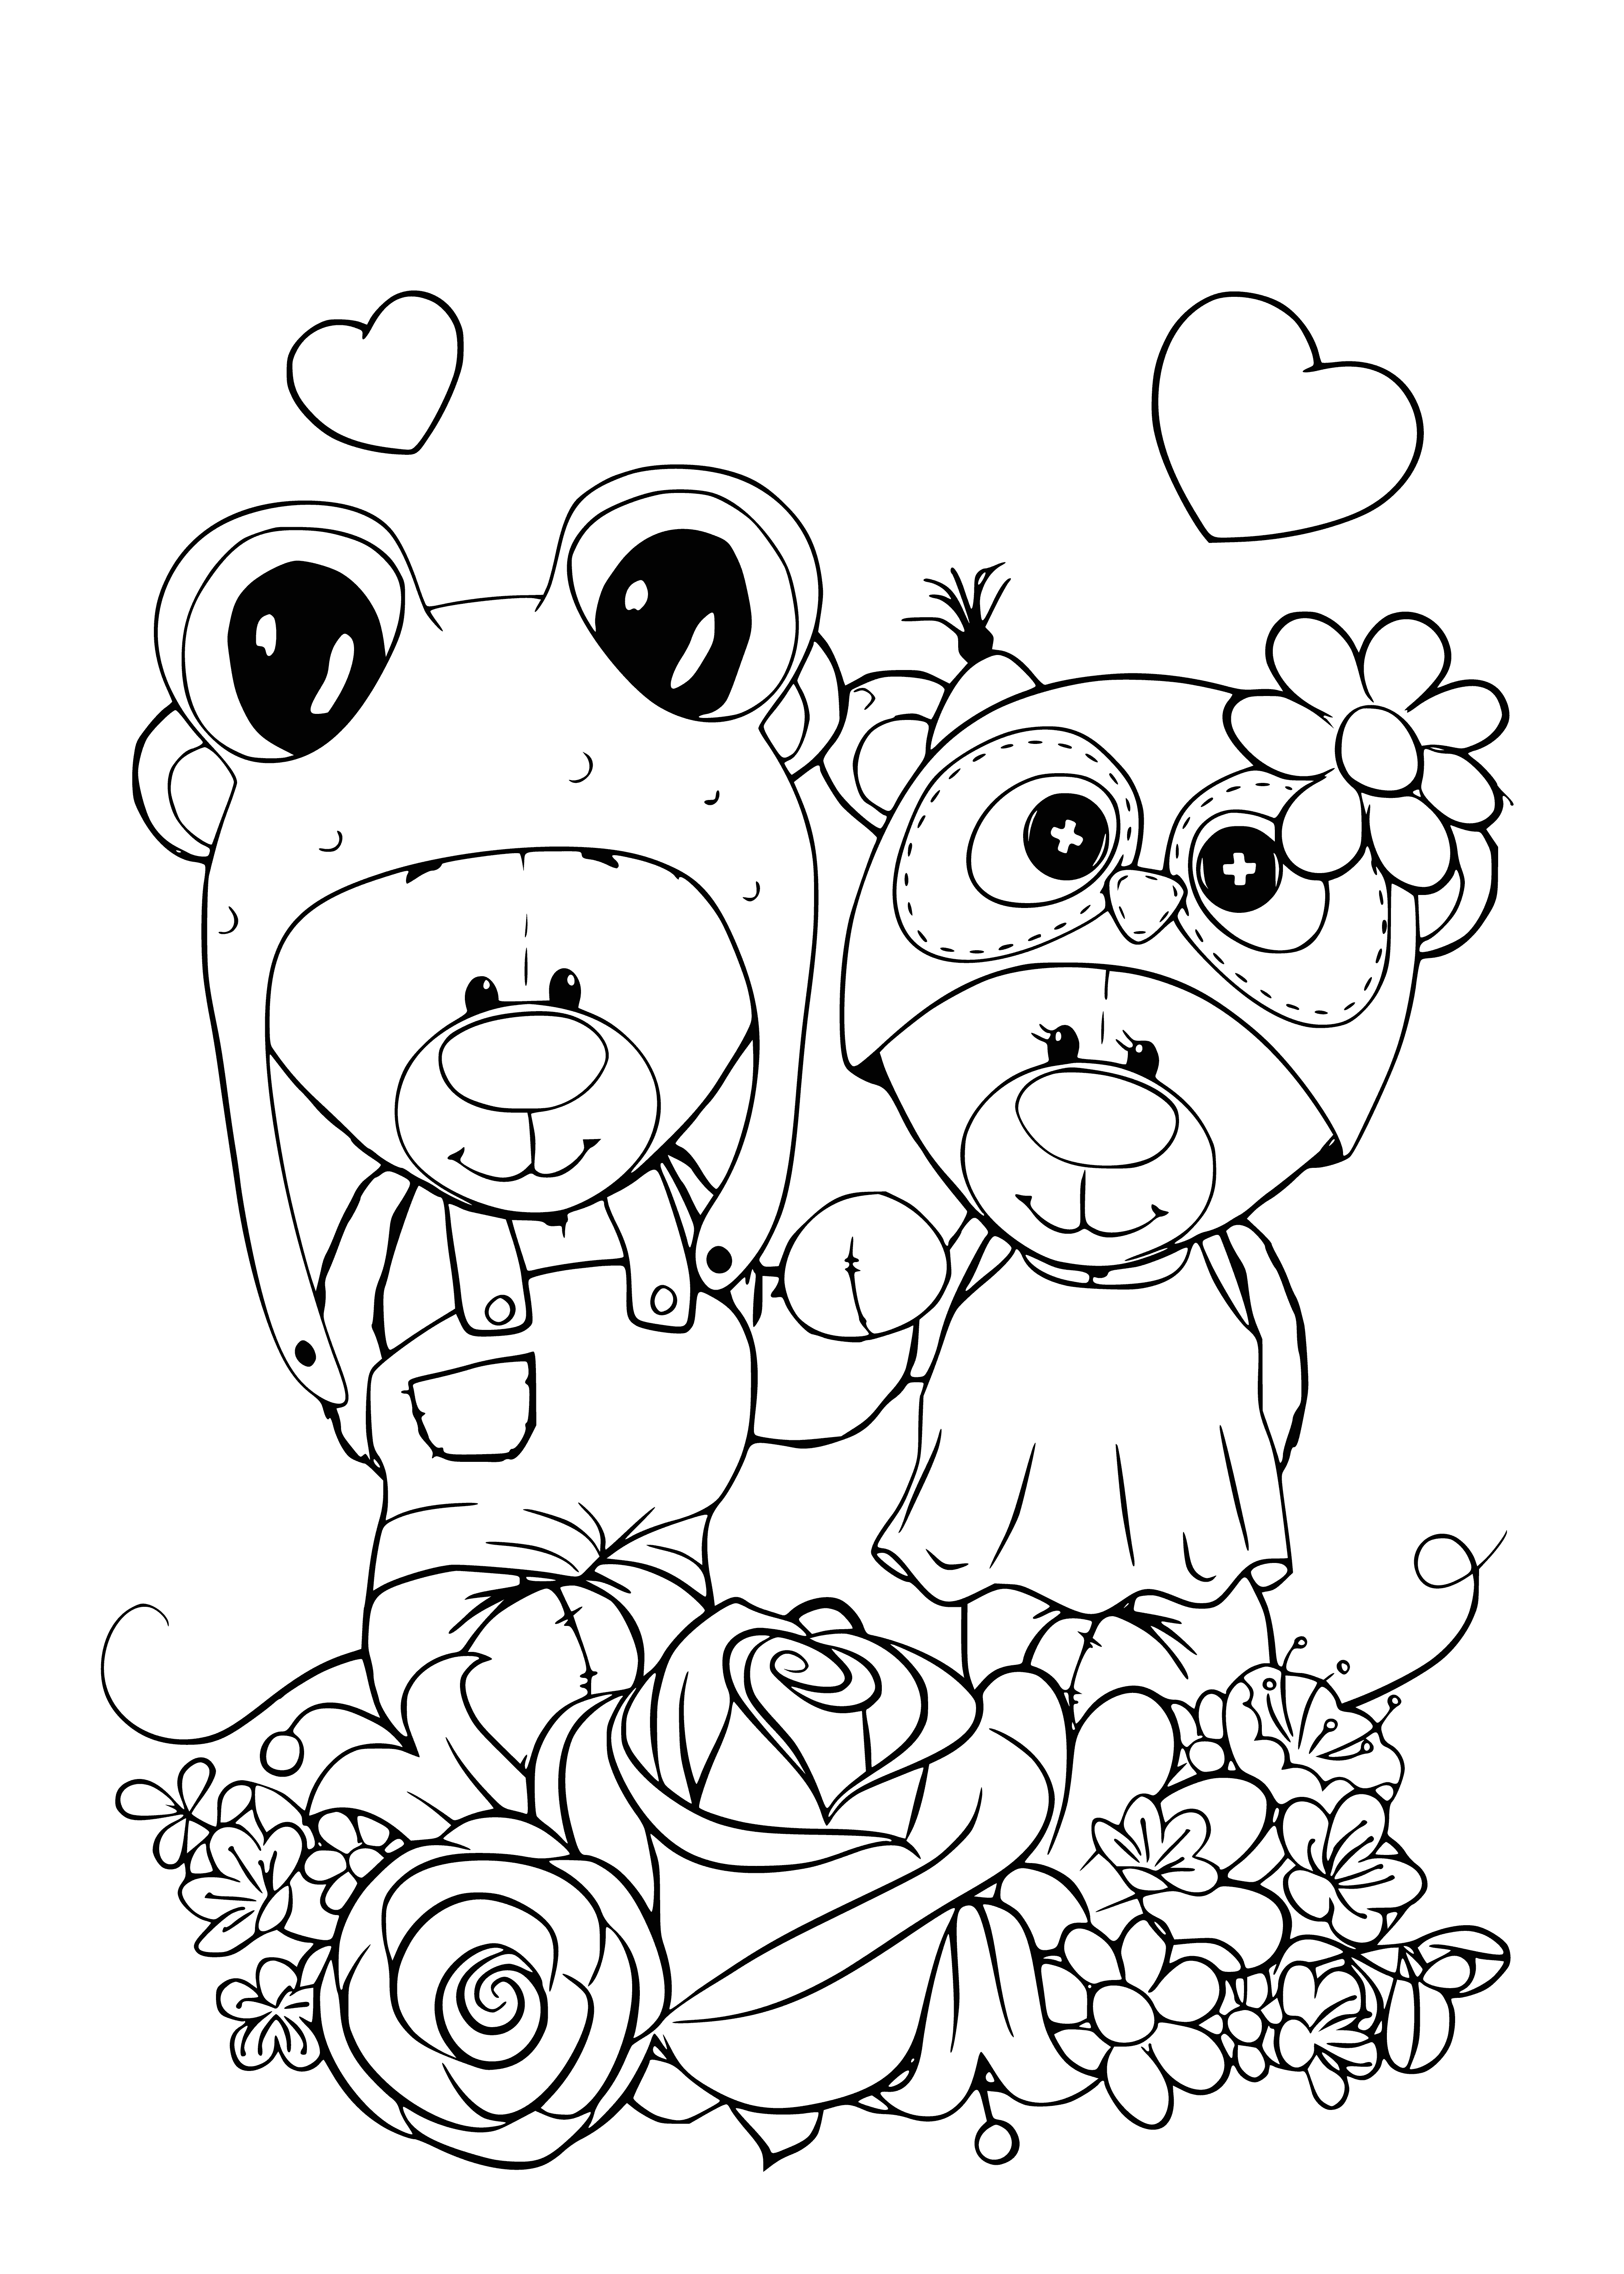 Teddy bears coloring page